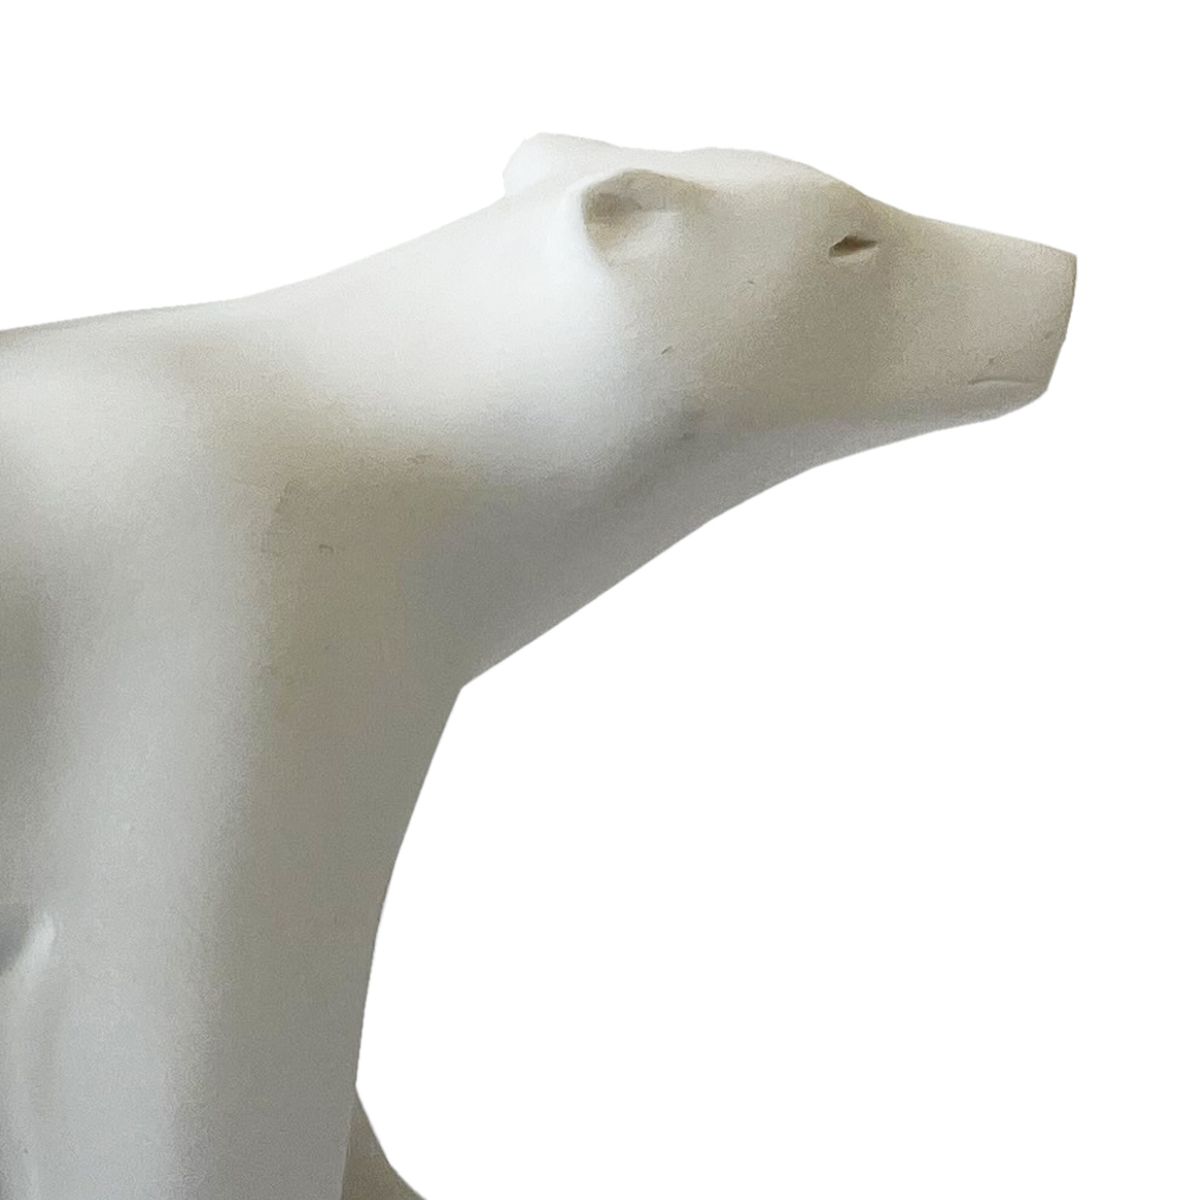 Figurine ornement de sapin reproduction ours blanc